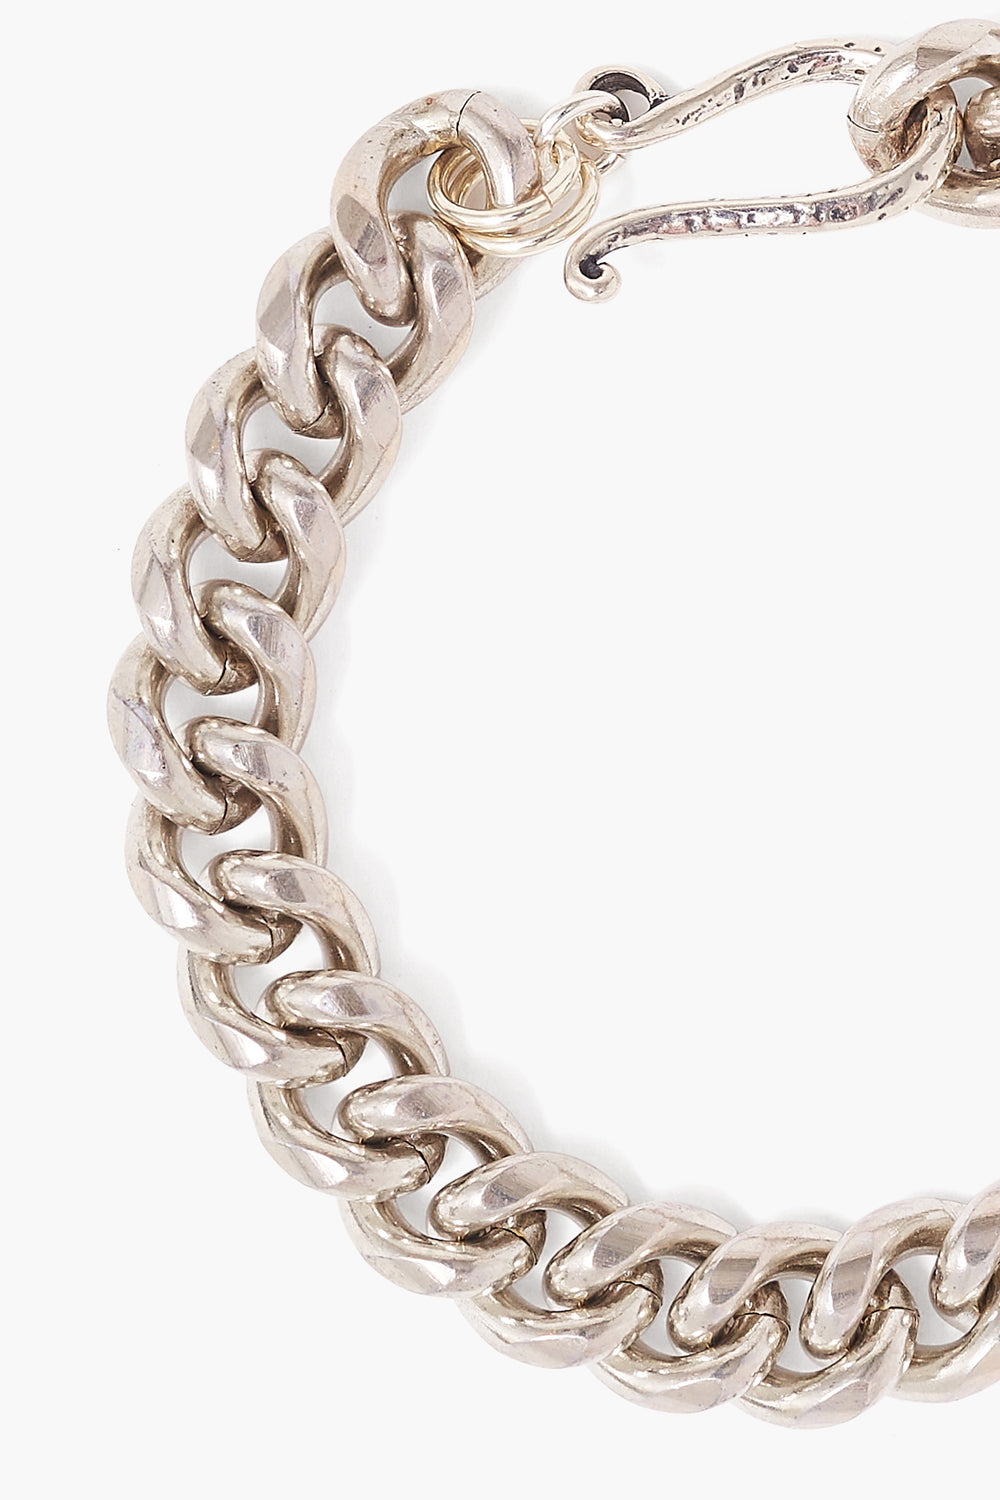 HOOK CLASP SILVER CURB CHAIN BRACELET - Kingfisher Road - Online Boutique